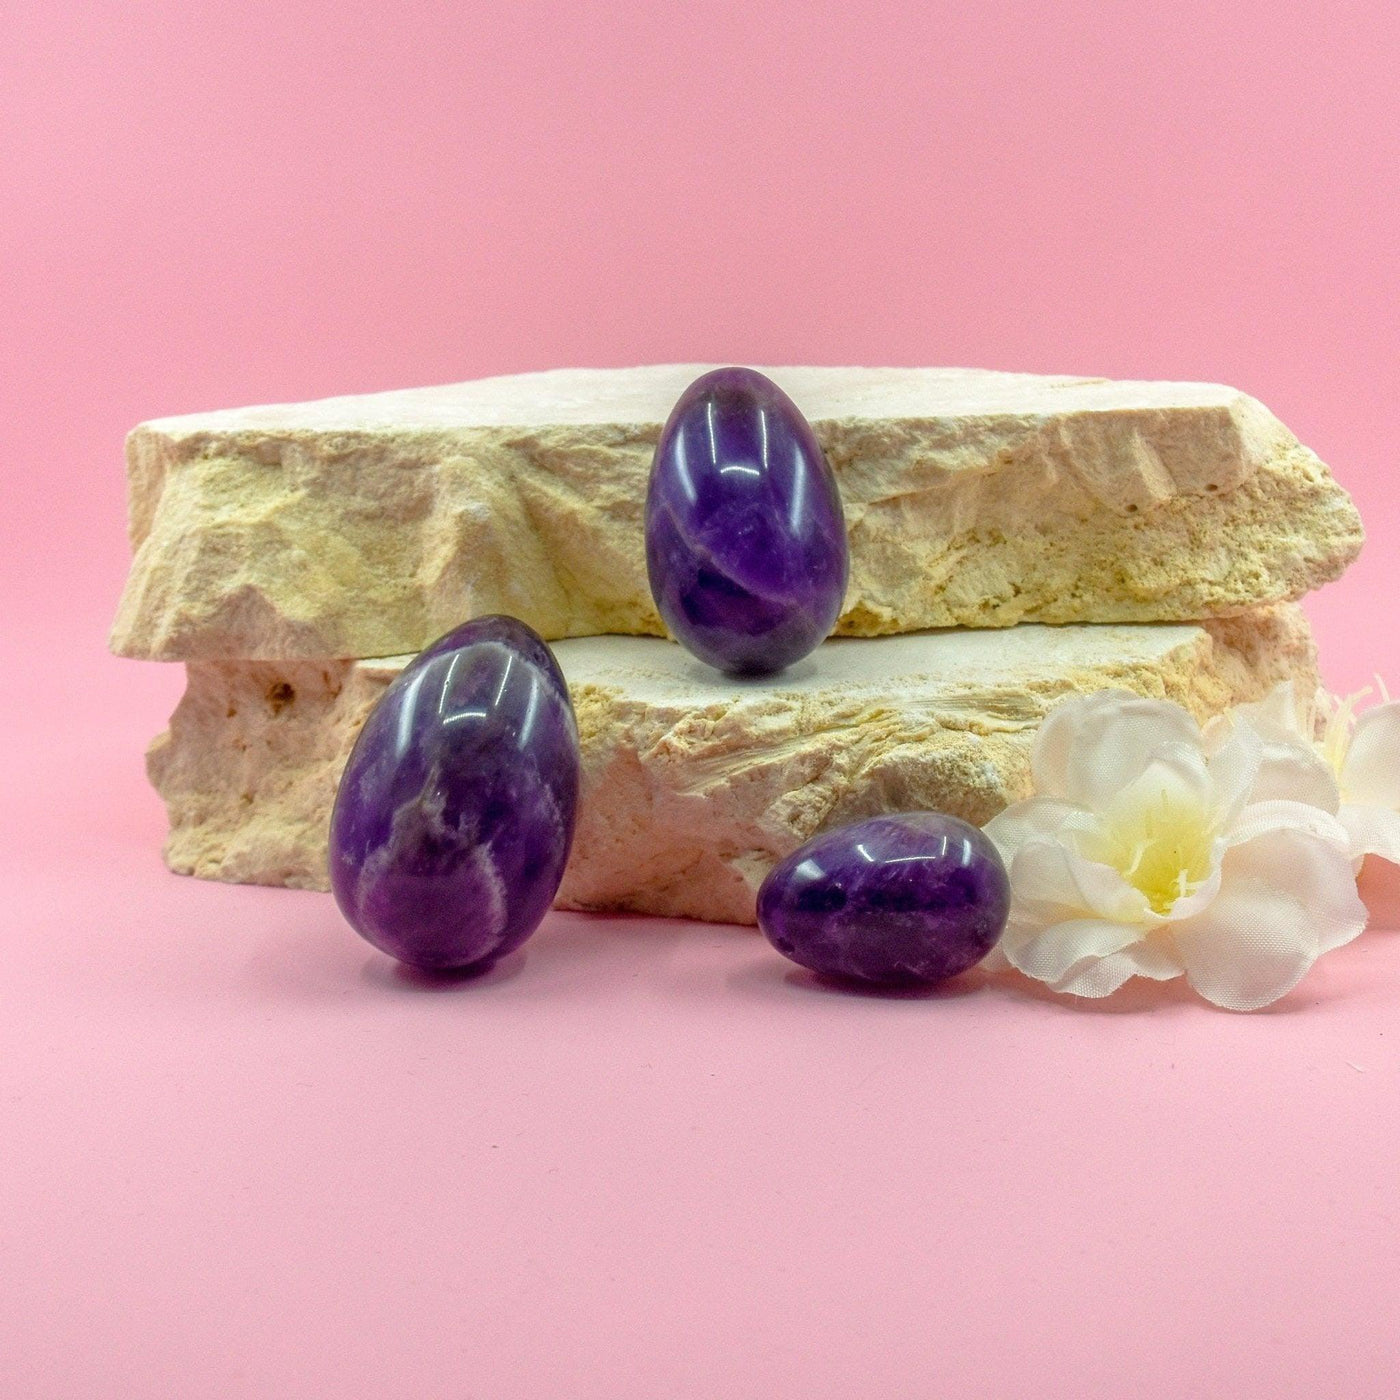 Amethyst Yoni Eggs - Wands of Lust Co